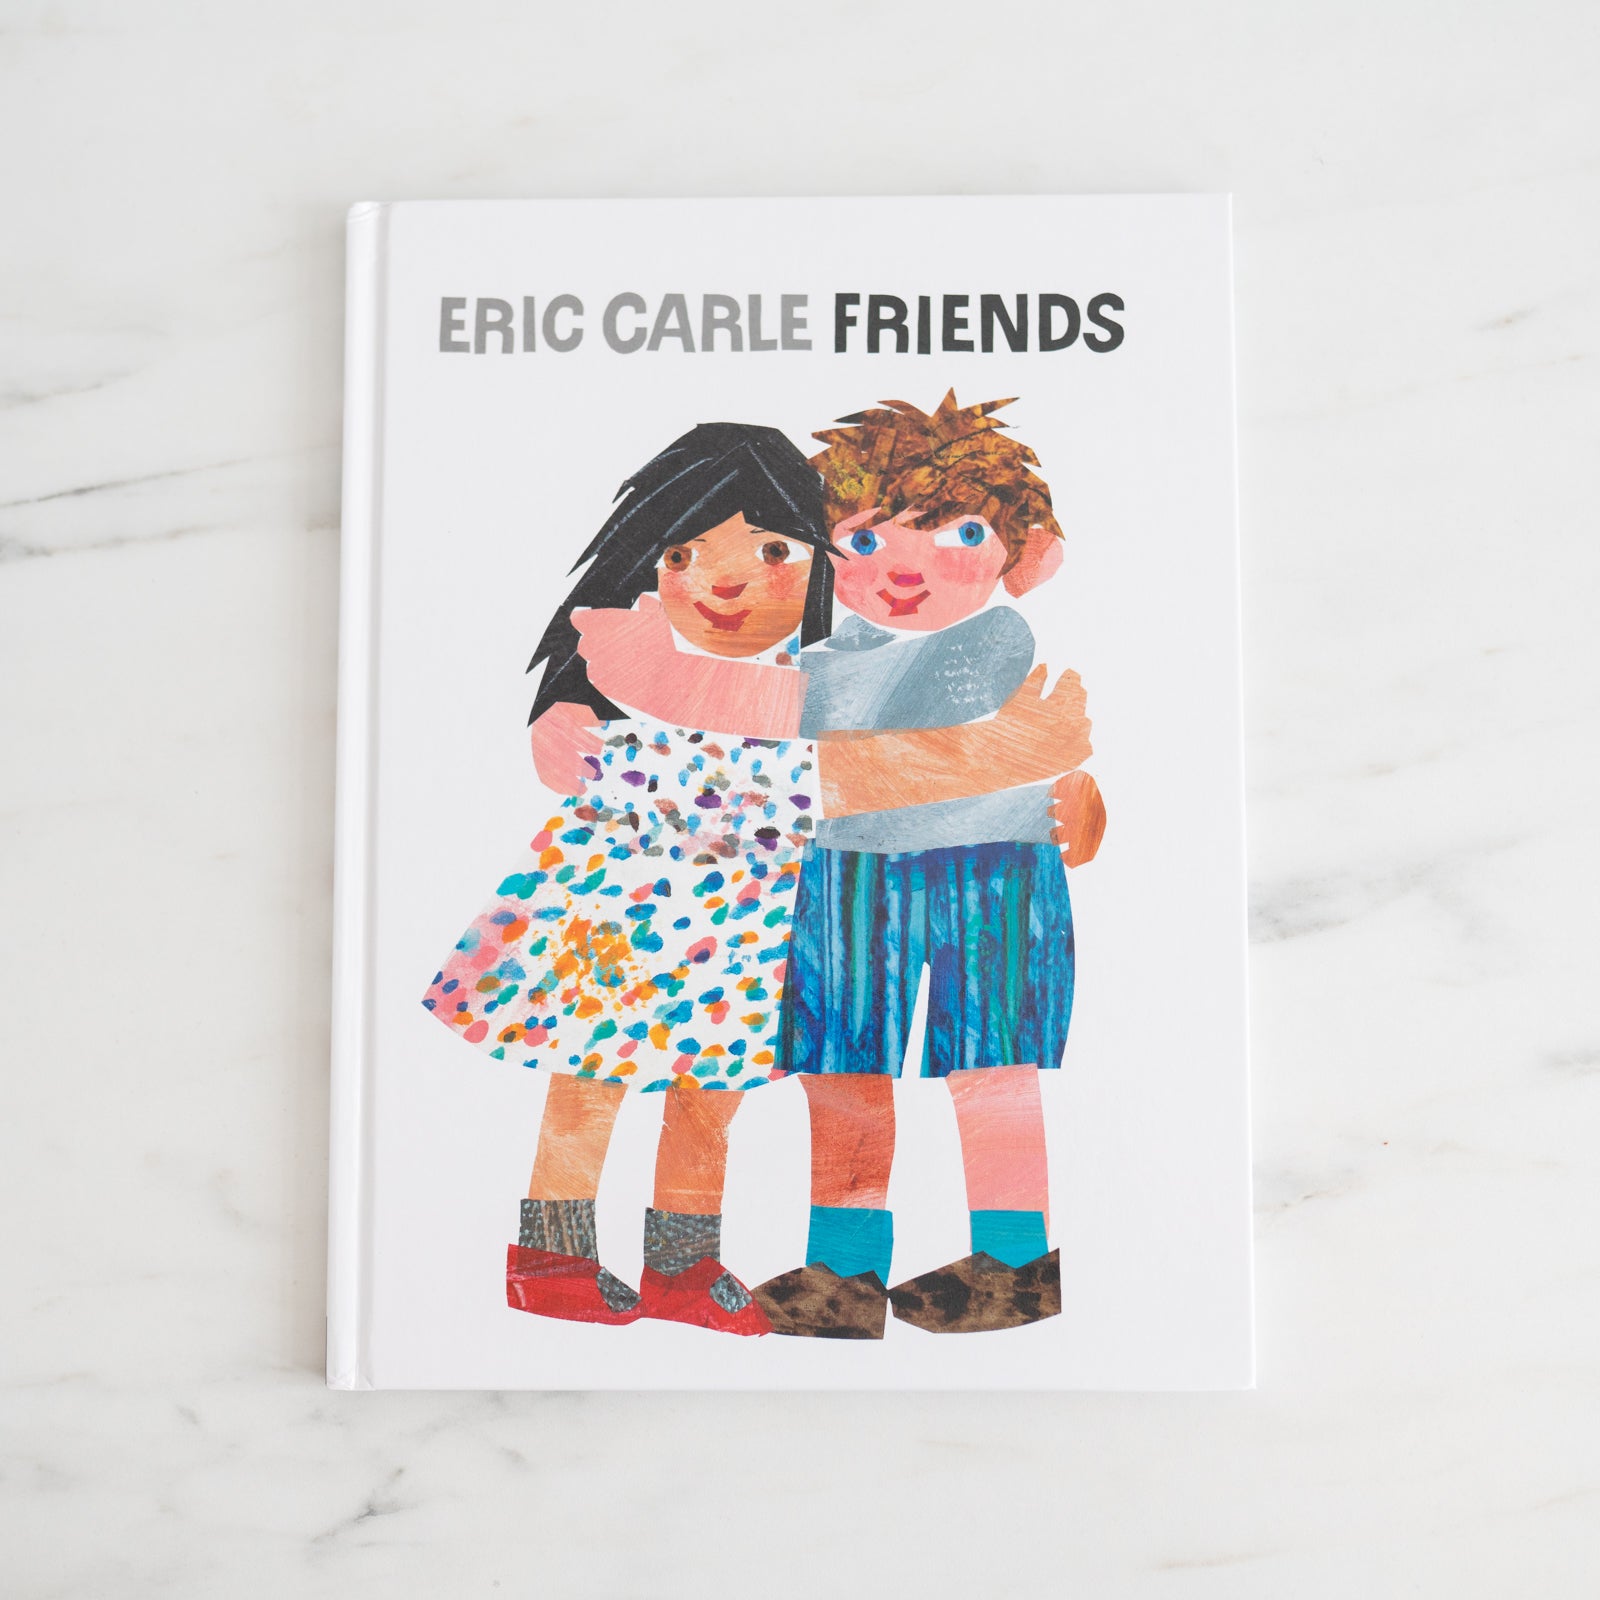 "Friends" by Eric Carle - Rug & Weave